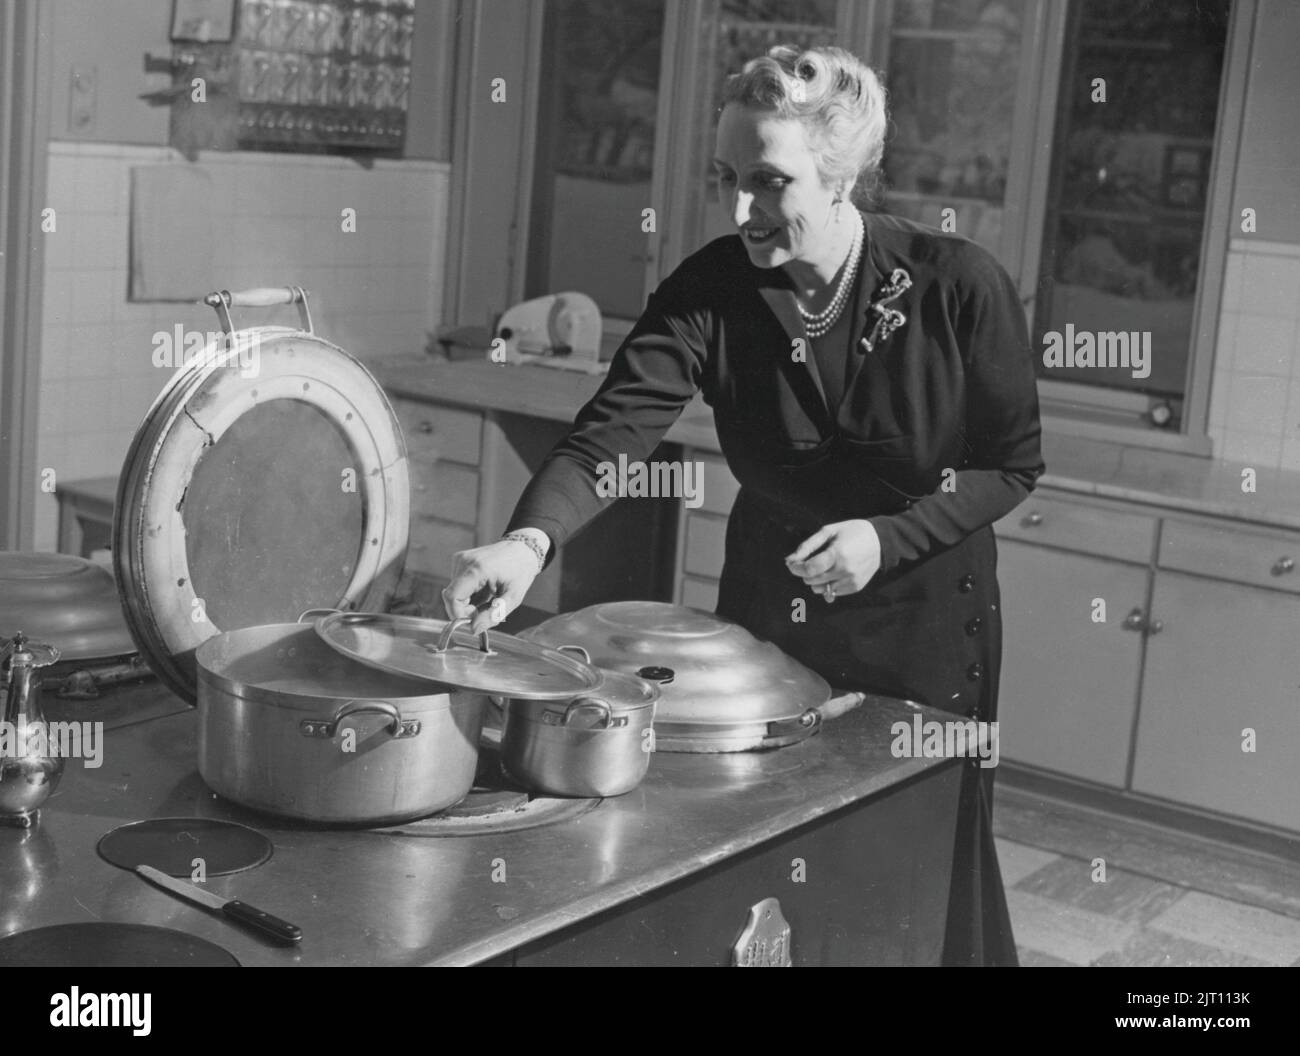 Crown Princess Martha of Norway. 1901-1954. Daughter of swedish Prince Carl. Pictured here in the 1951 in the kitchen with a AGA cooker visible. A swedish invention by Gustaf Dalén with the principle of heat storage, a combination of two large hotplates and two ovens into one unit, the AGA cooker. The oldest AGA cooker still in use belongs to the Hett family of Sussex and it was installed 1932. Stock Photo